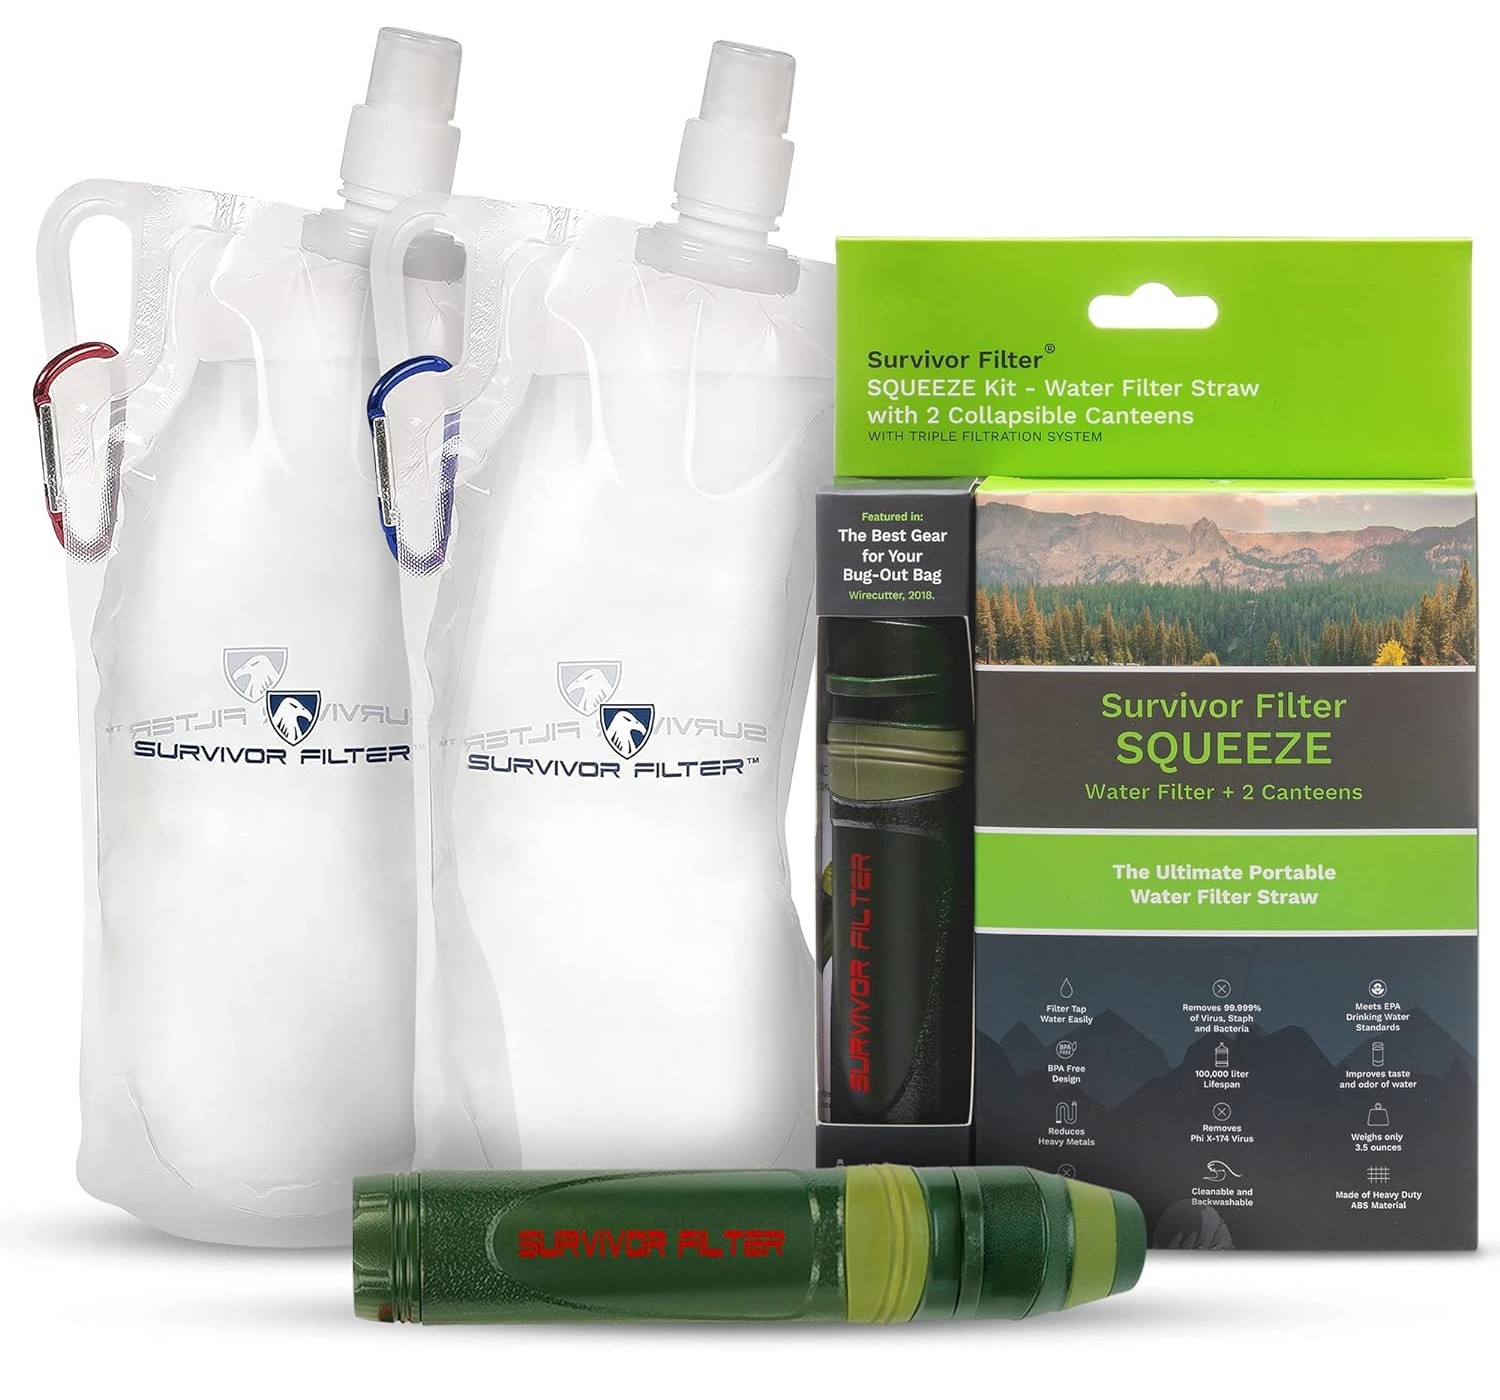 Survivor Filter Squeeze Kit - Water Purifier Survival Straw with Collapsible Water Bottle - Virus Tested Survival Straw with 3 Stage Filtration - Water Filter for Camping